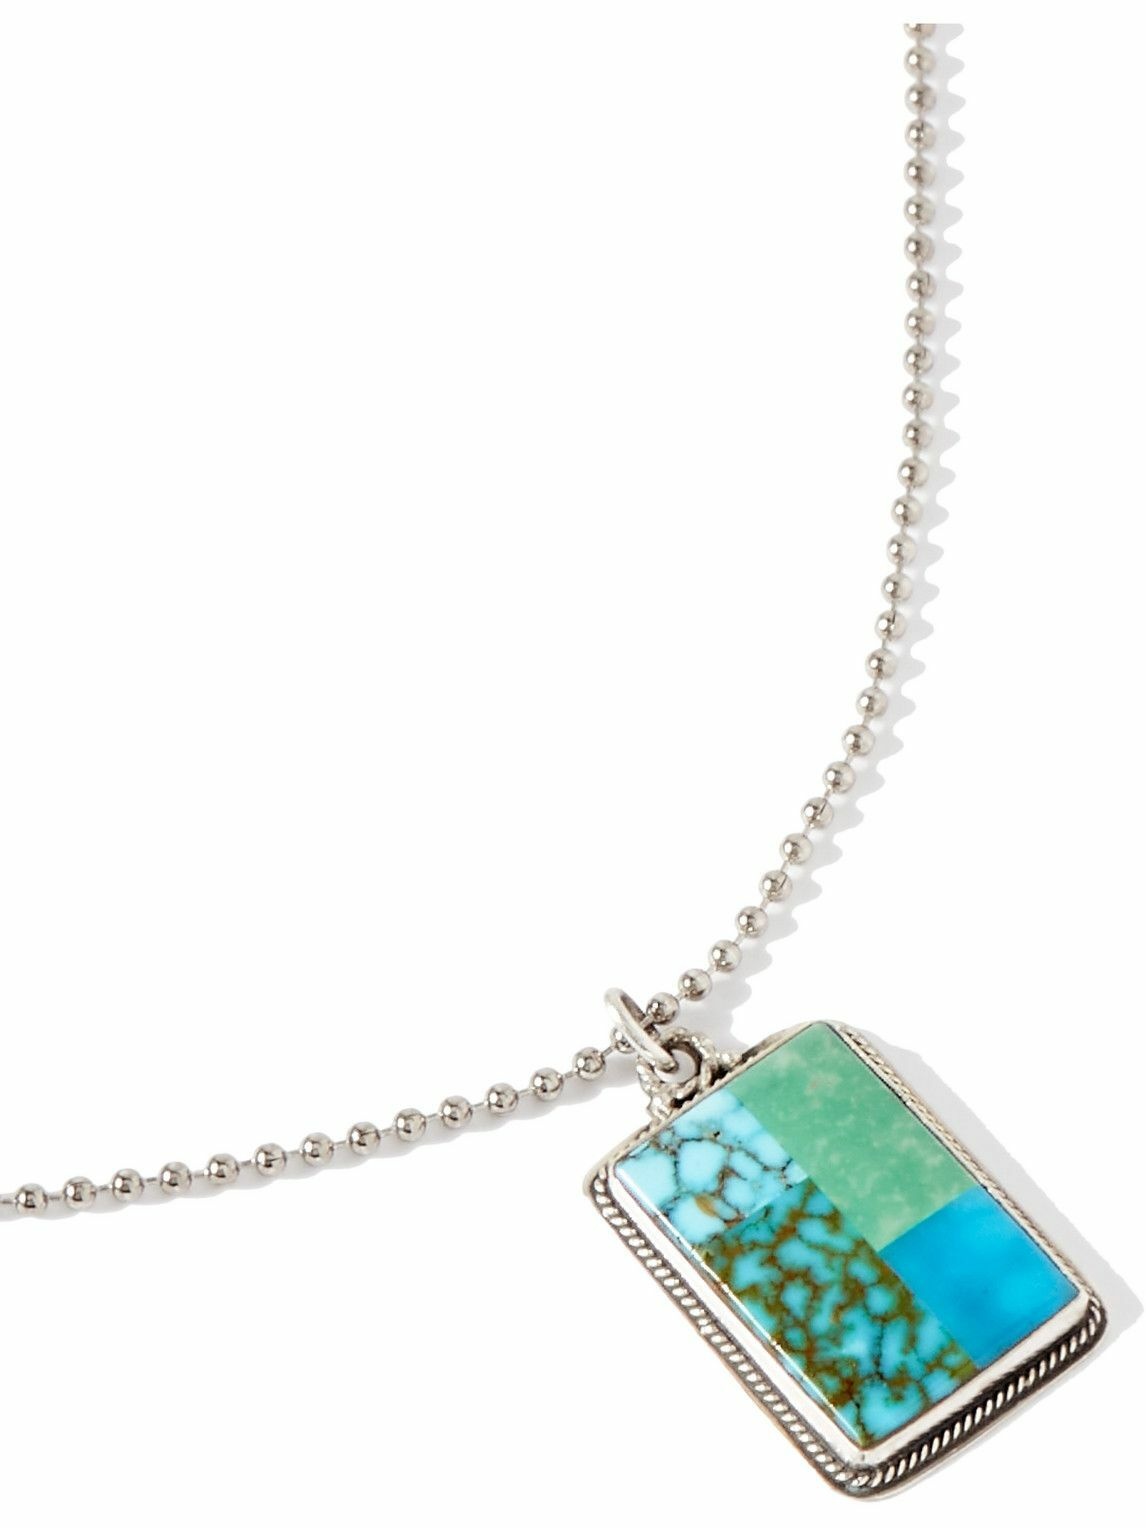 Photo: Peyote Bird - Aldrich Four Brothers Sterling Silver and Turquoise Necklace